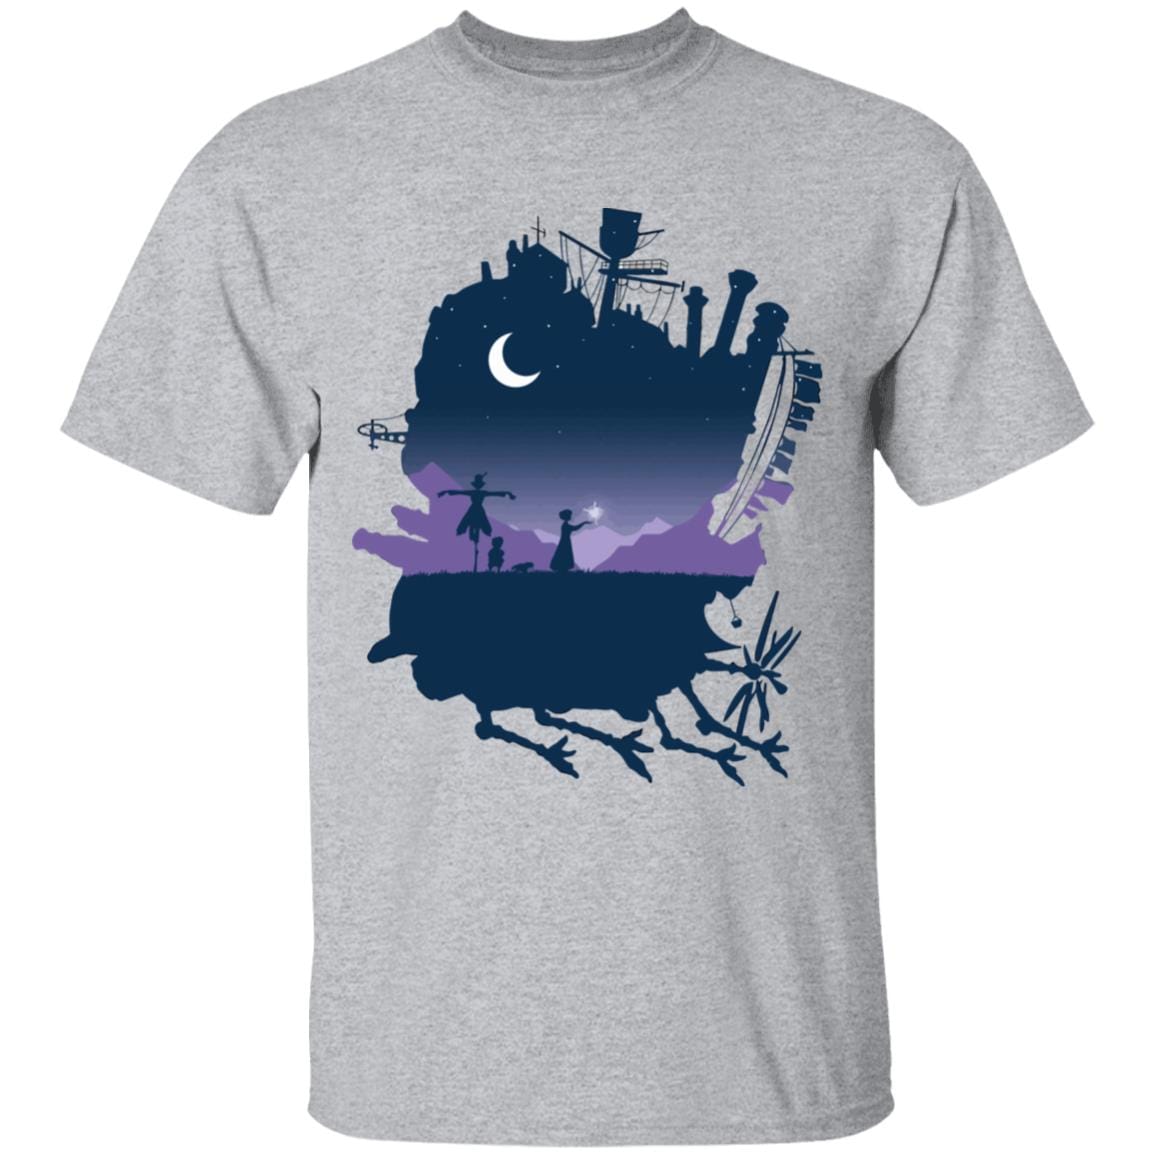 Howl’s Moving Castle Midnight T Shirt